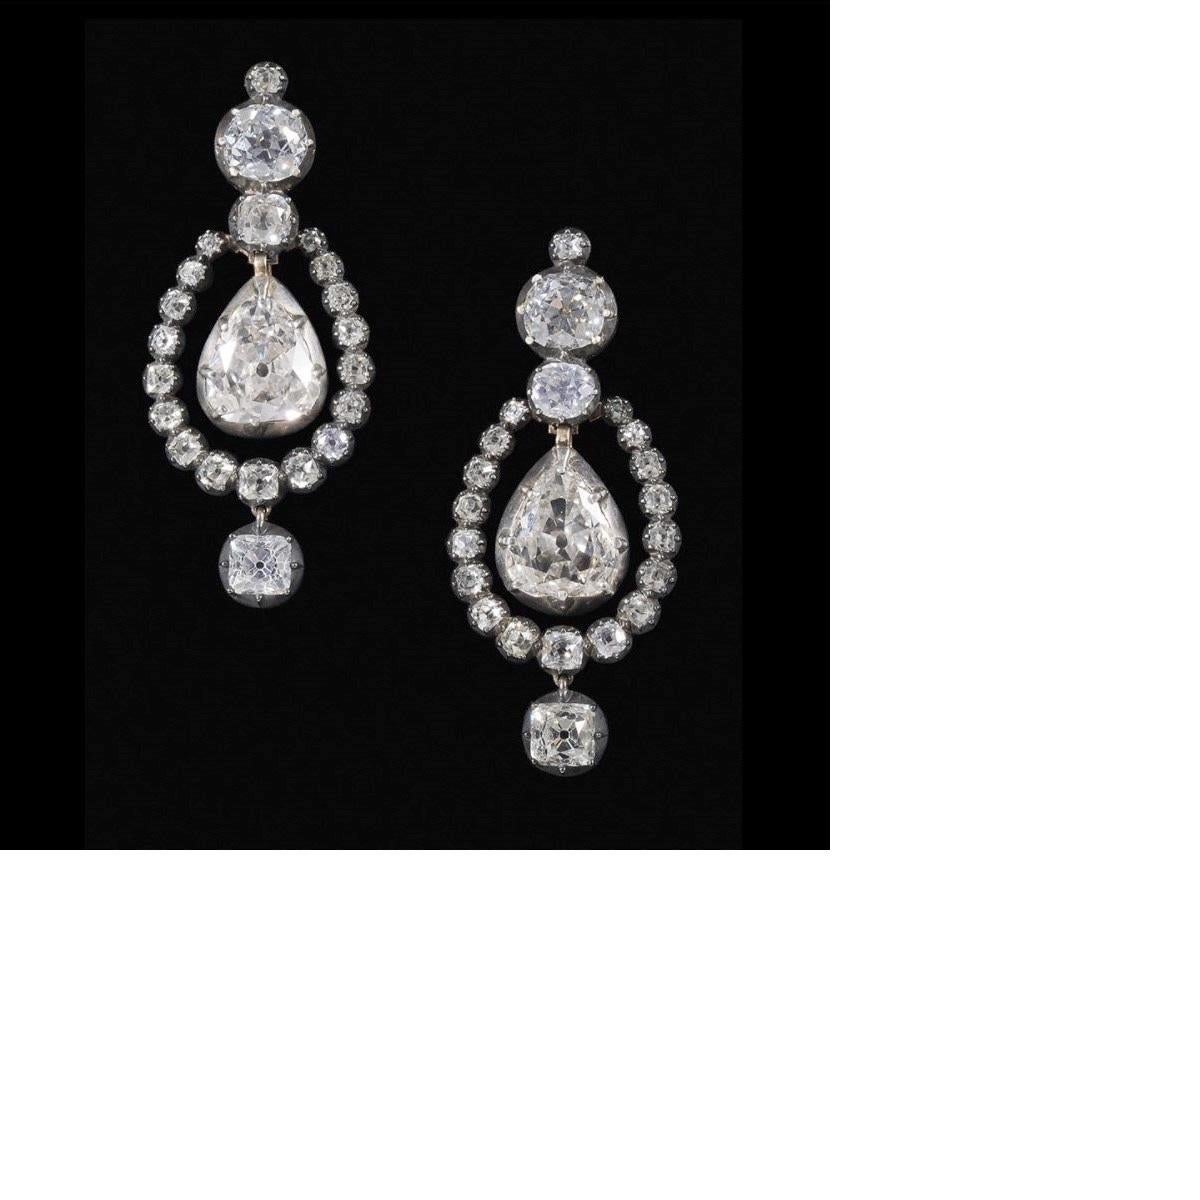 A pair of Georgian 15 karat gold and silver earrings with diamonds. The earrings contain an approximate total diamond weight of 21.50 carats; 2 modified pear cut diamonds weighing 4.61 carats, K color, I1 clarity, GIA report #5181908769 and 5.08